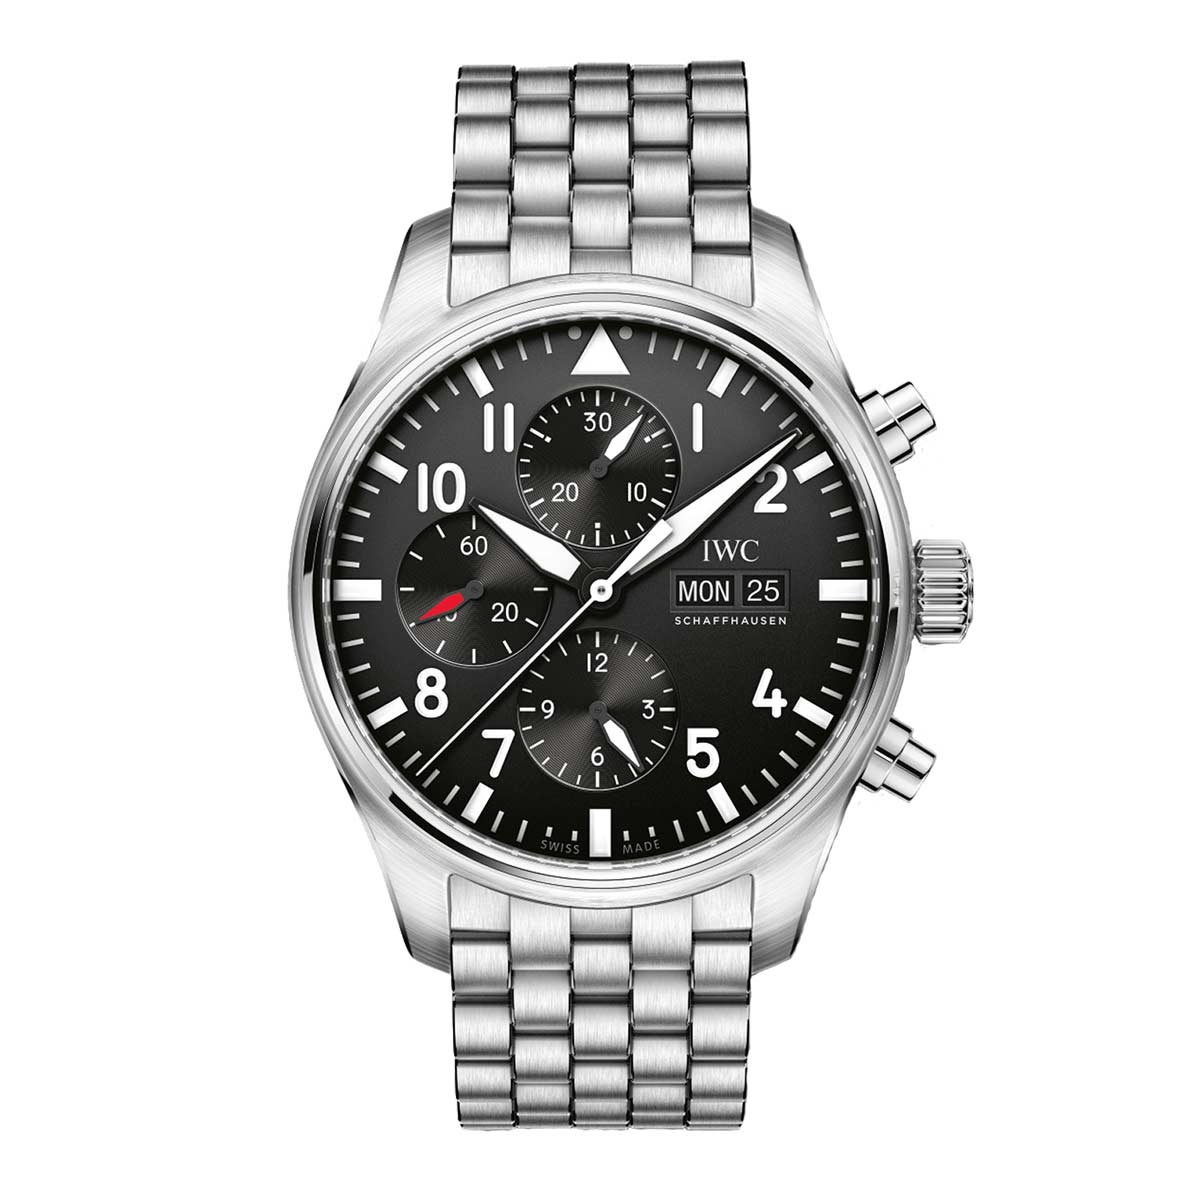 IWC Schaffhausen Pilot's Chronograph 43mm Watch, Black and White Dial ...